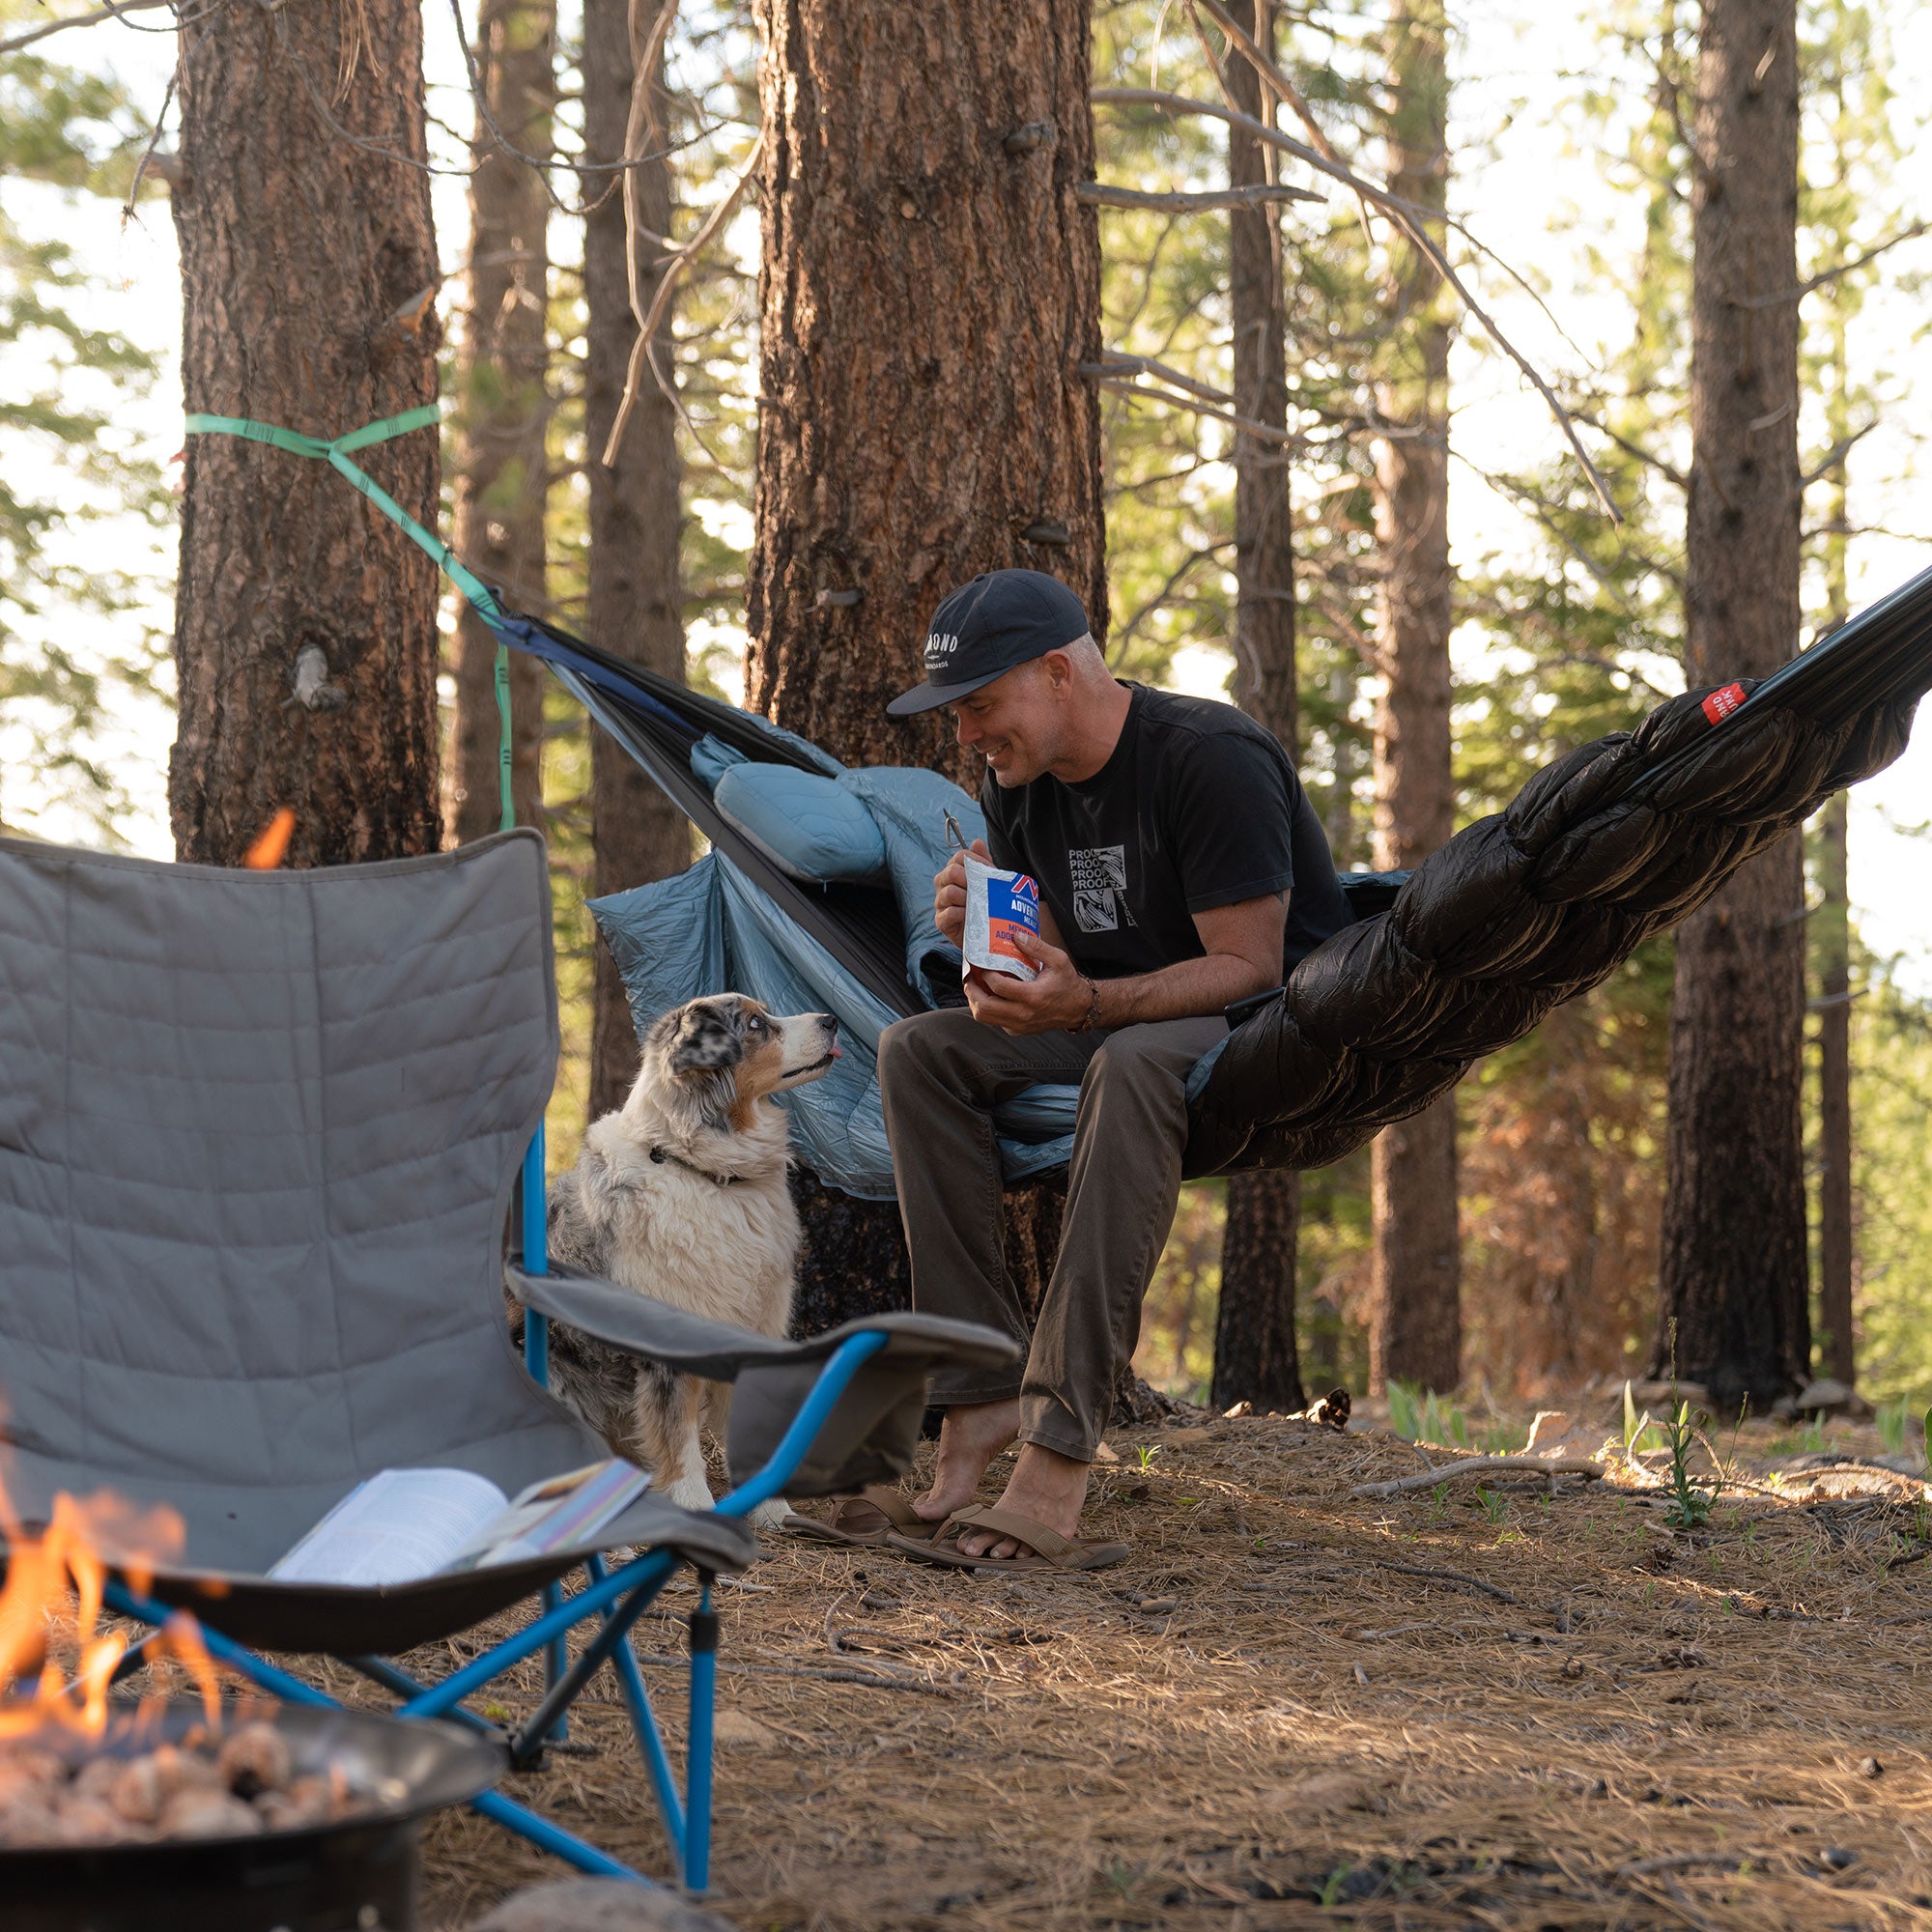 Man lounging in evolution hammock eating mountain house meals by a firepit with his dog looking longingly for some food